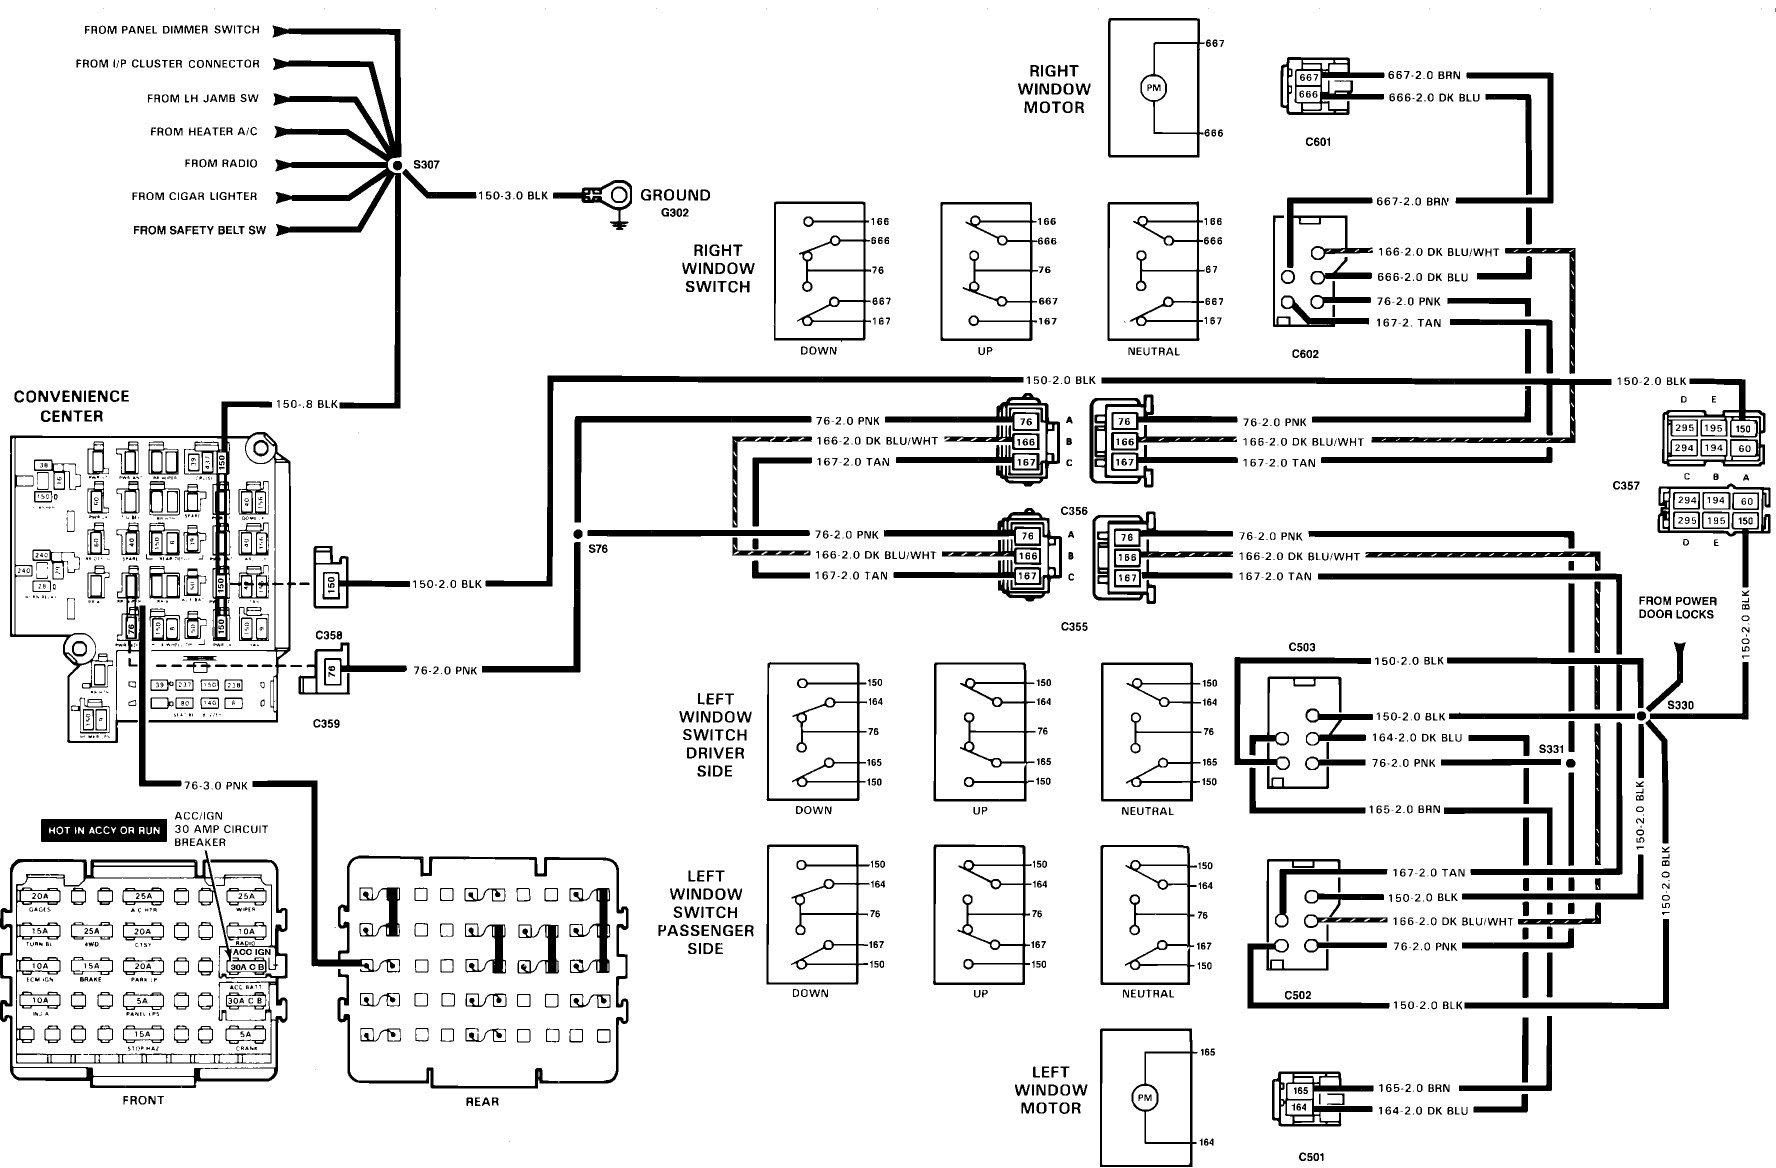 Silverado Wiring Diagram Electrical Diagrams Chevy Only Page 2 Chevy